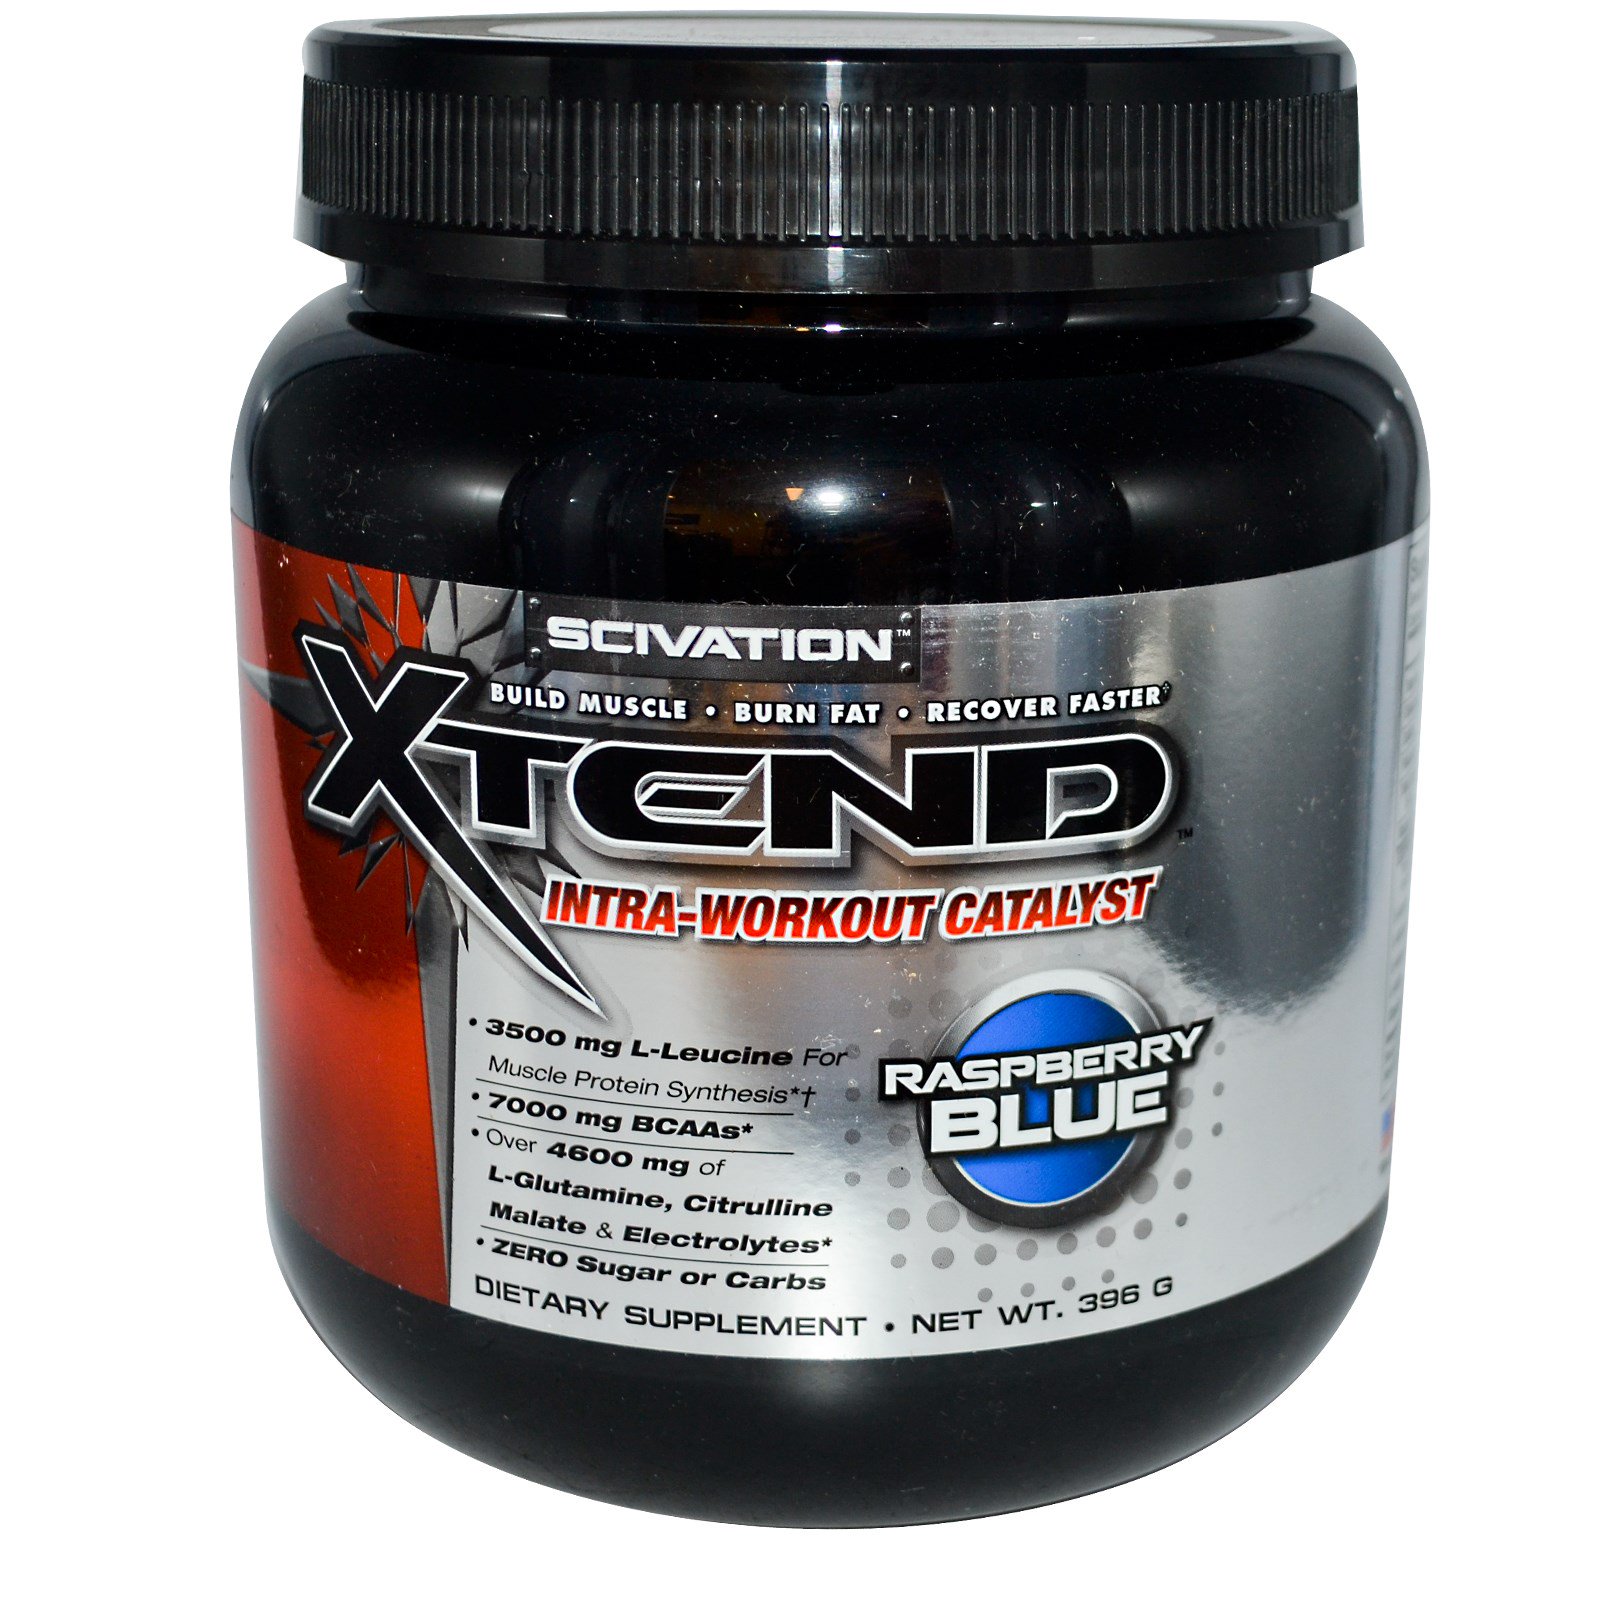 Simple Xtend workout catalyst review for Beginner